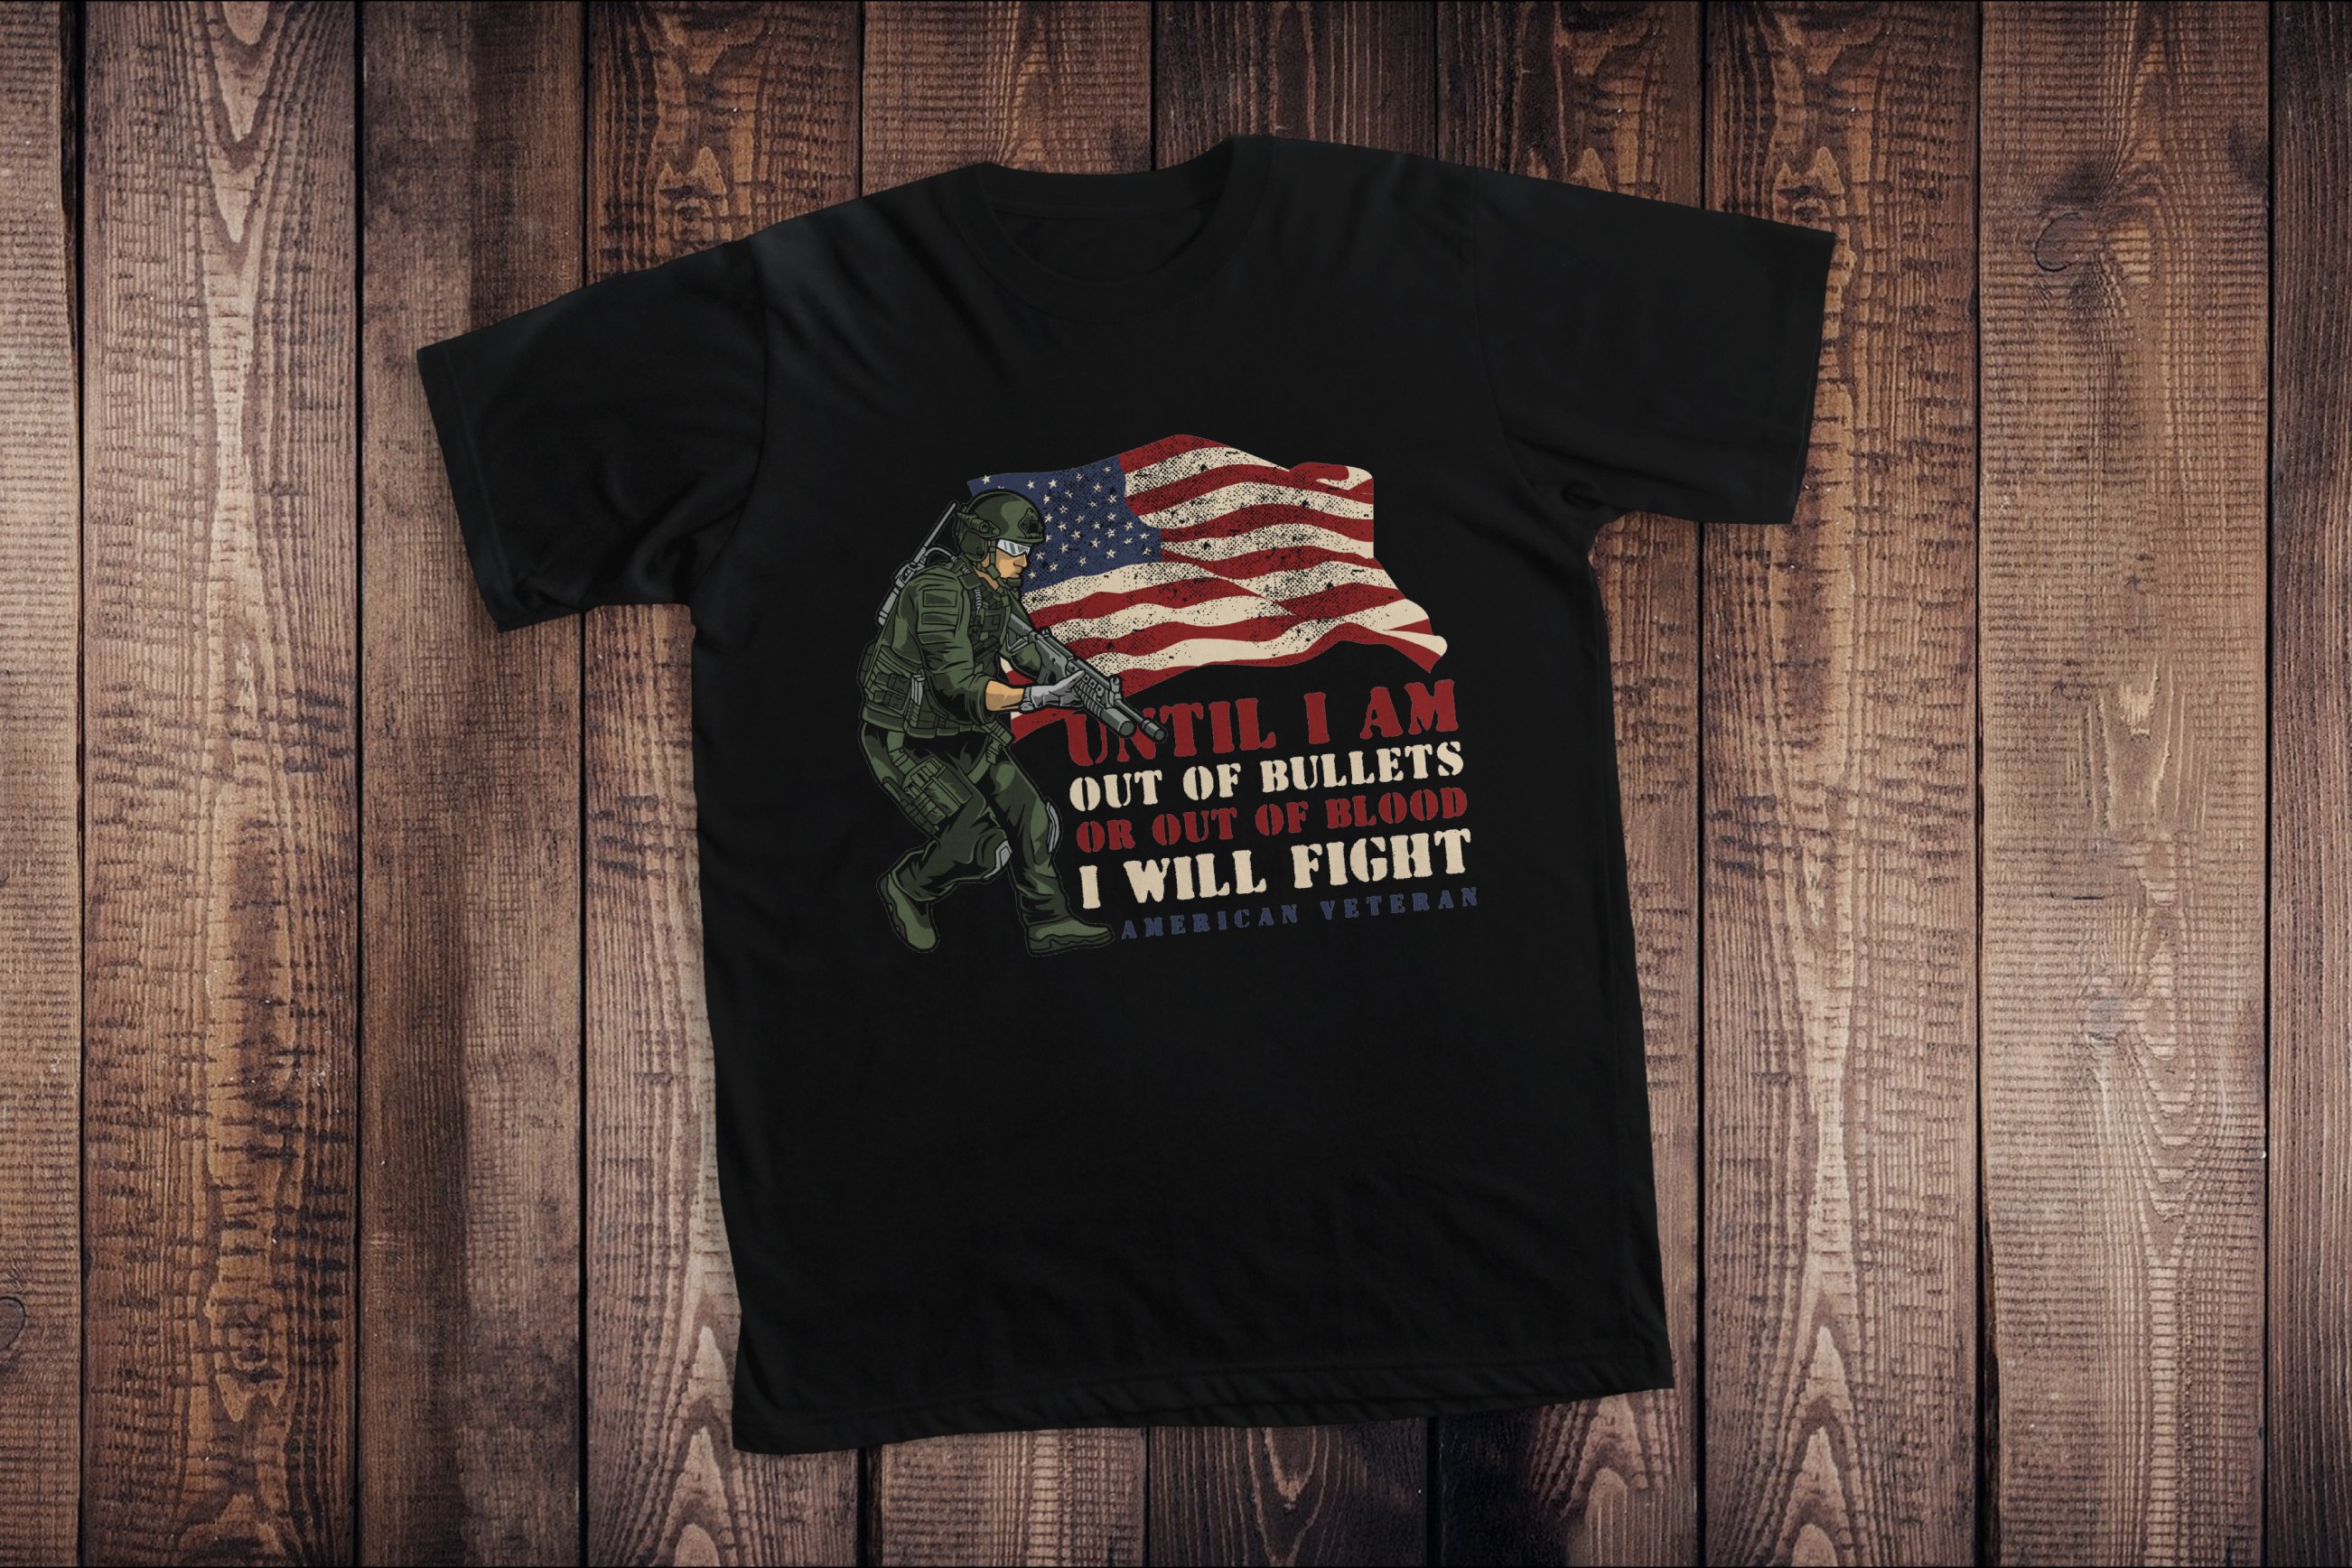 Nice American graphic on a black t-shirt.